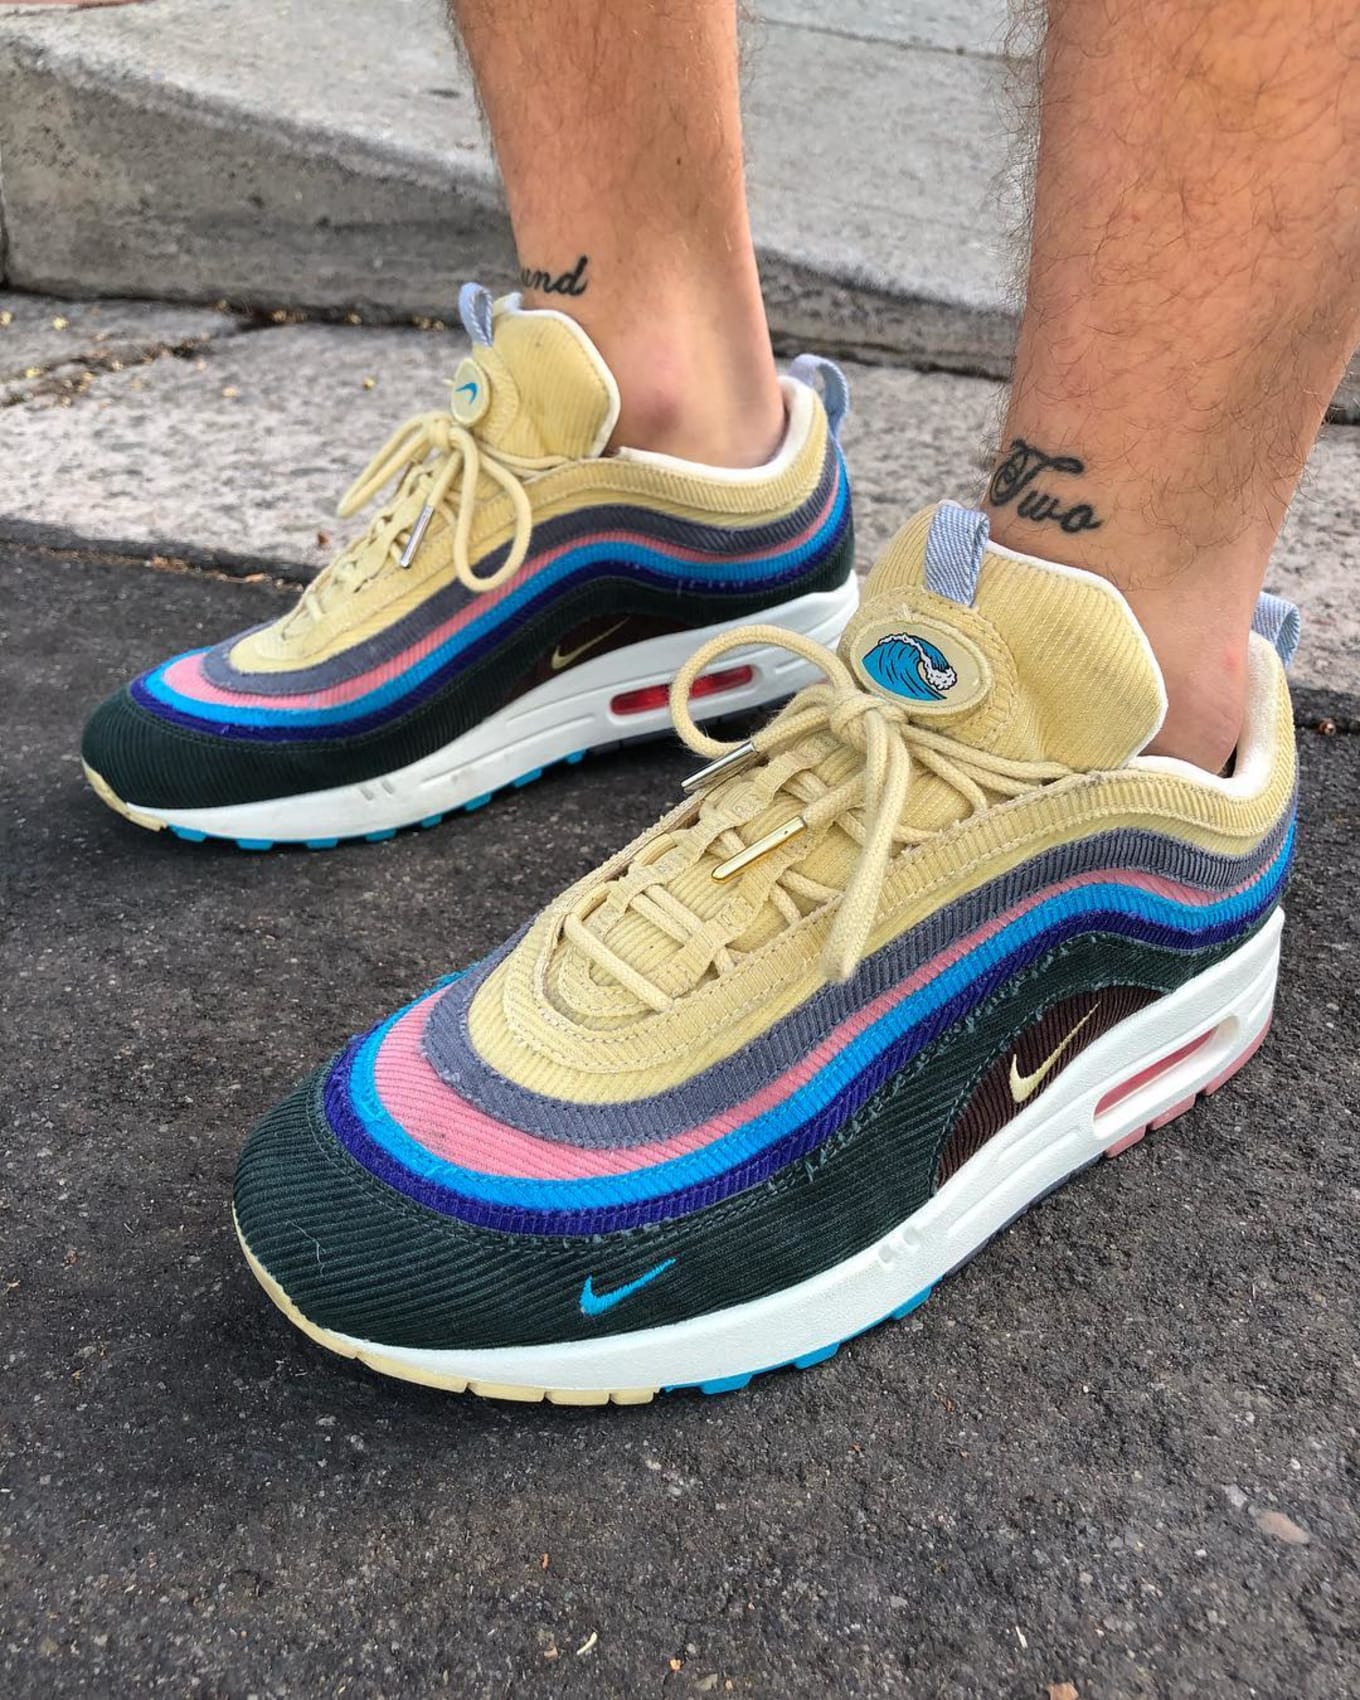 nike air max 97 one Off 68%